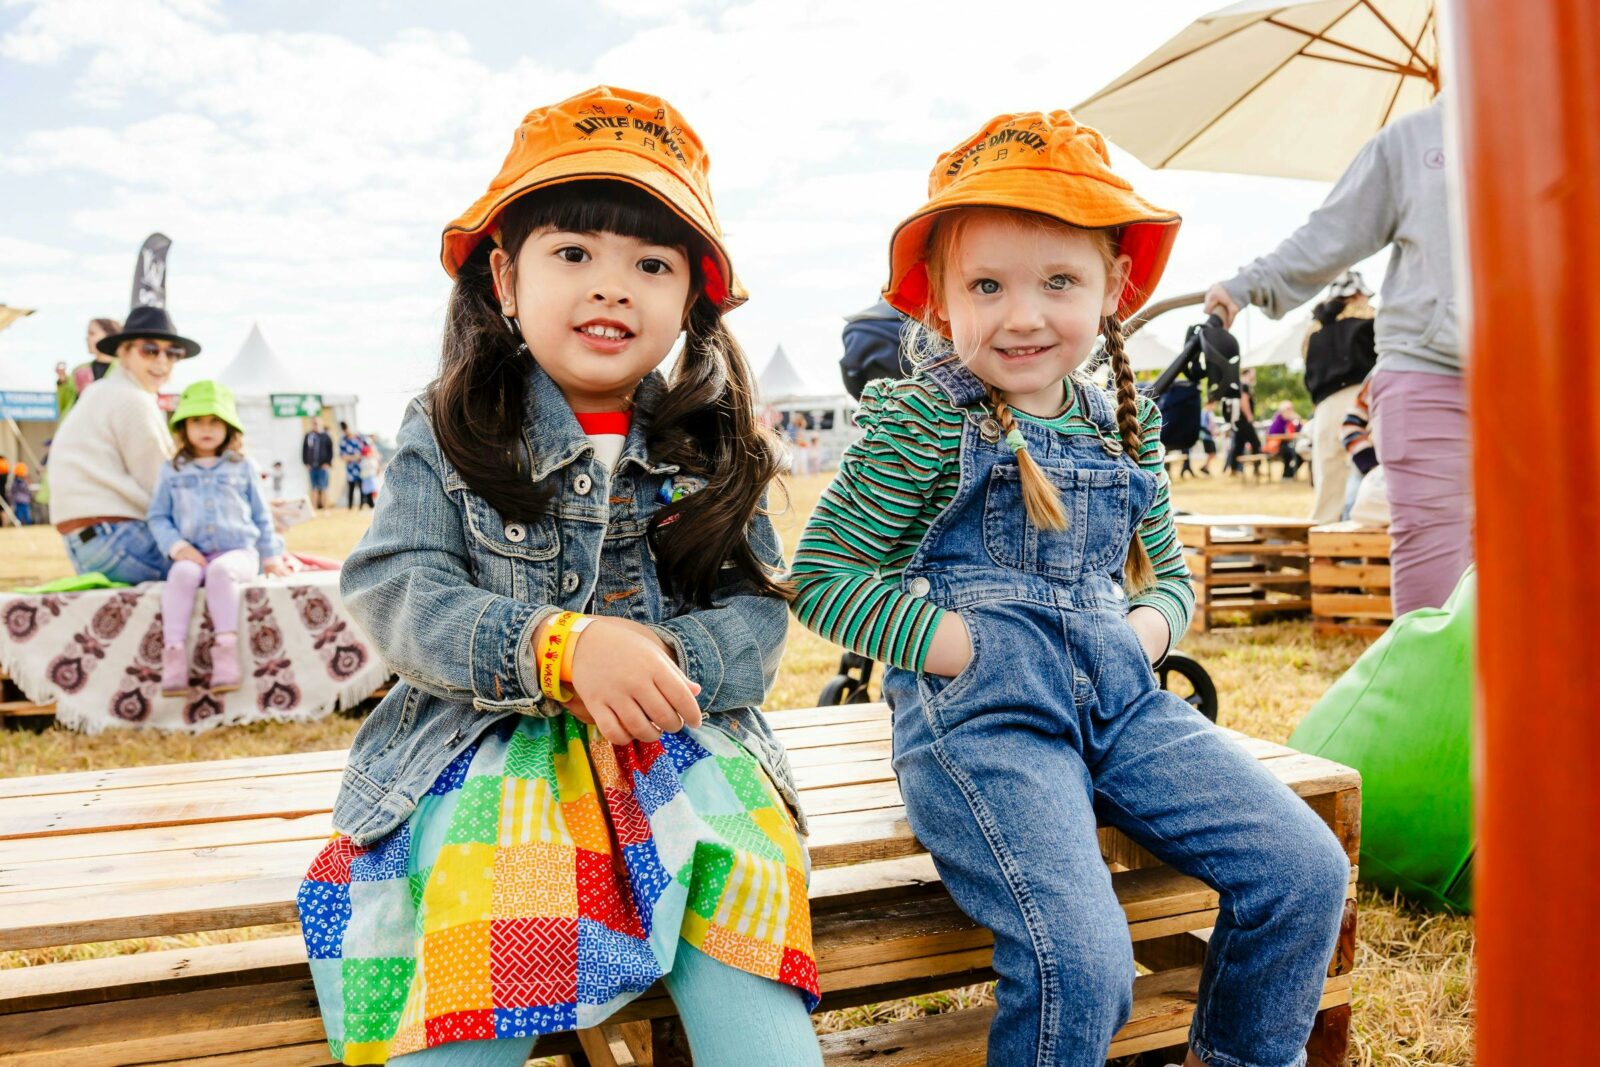 Kids sitting on crates at a festival